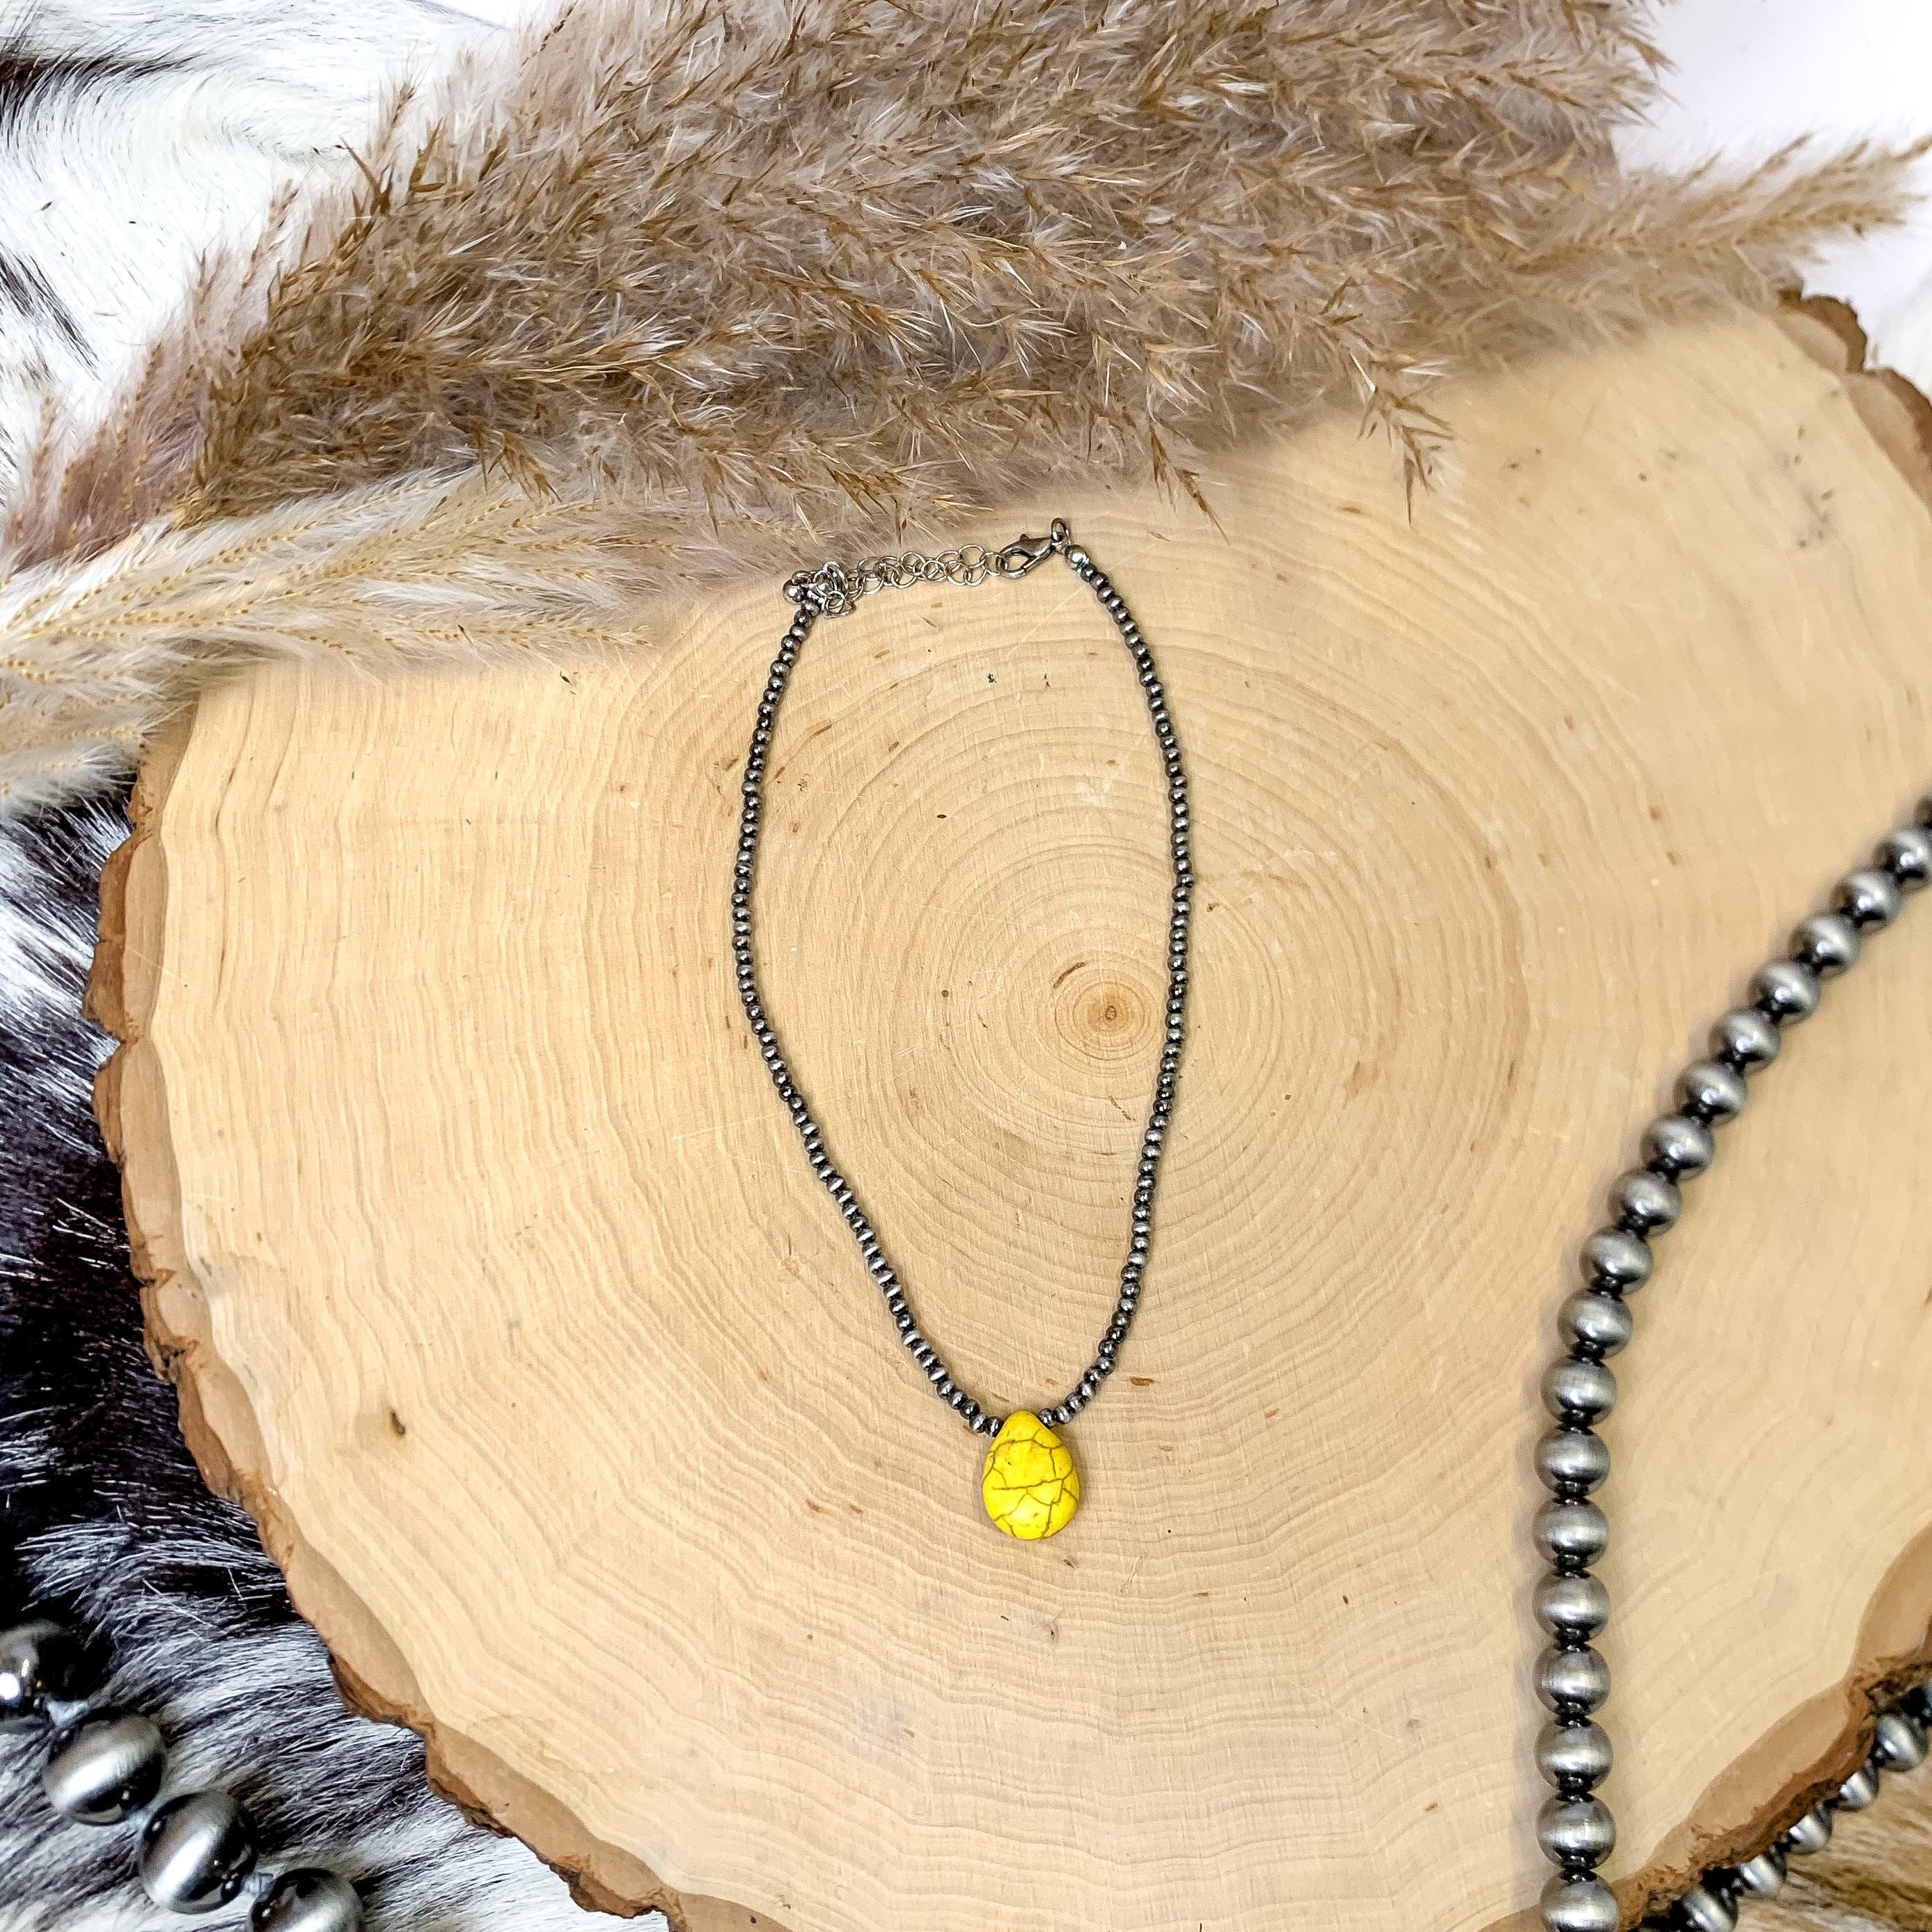 Small Faux Navajo Pearls Choker Necklace in Silver Tone with Mustard Yellow Teardrop Stone